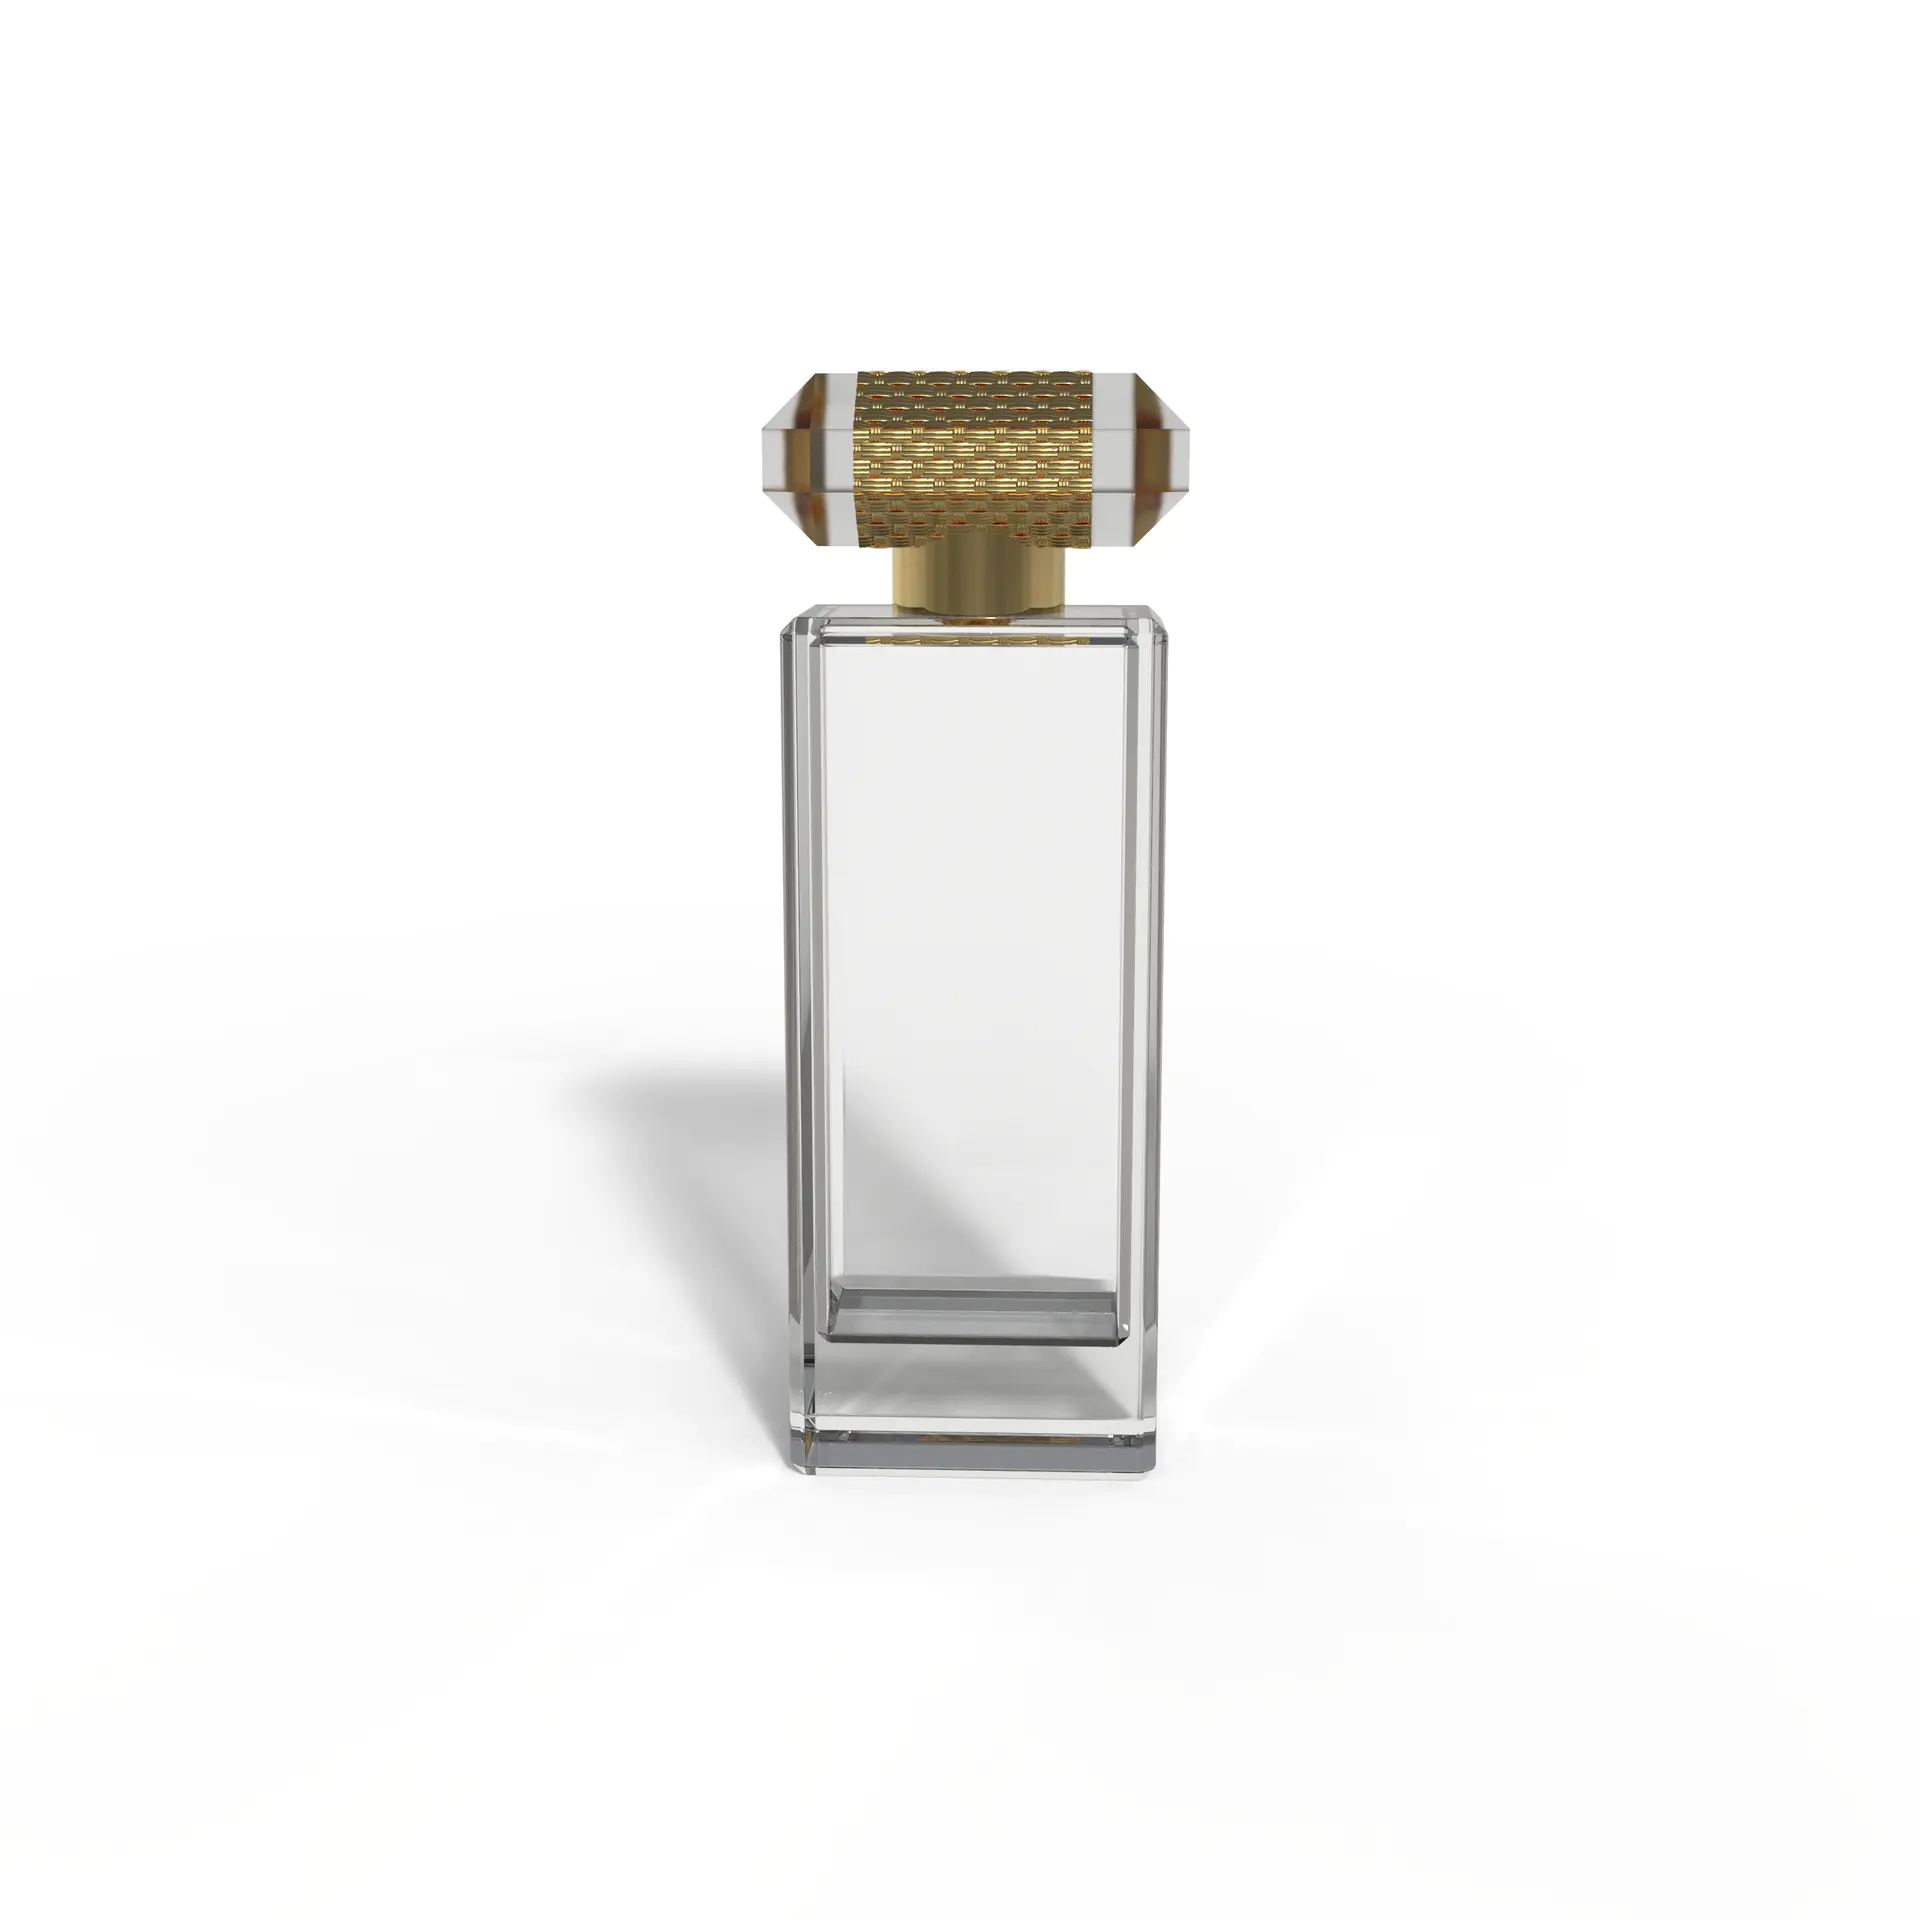 Modern Classic Style of Glass Perfume Bottle